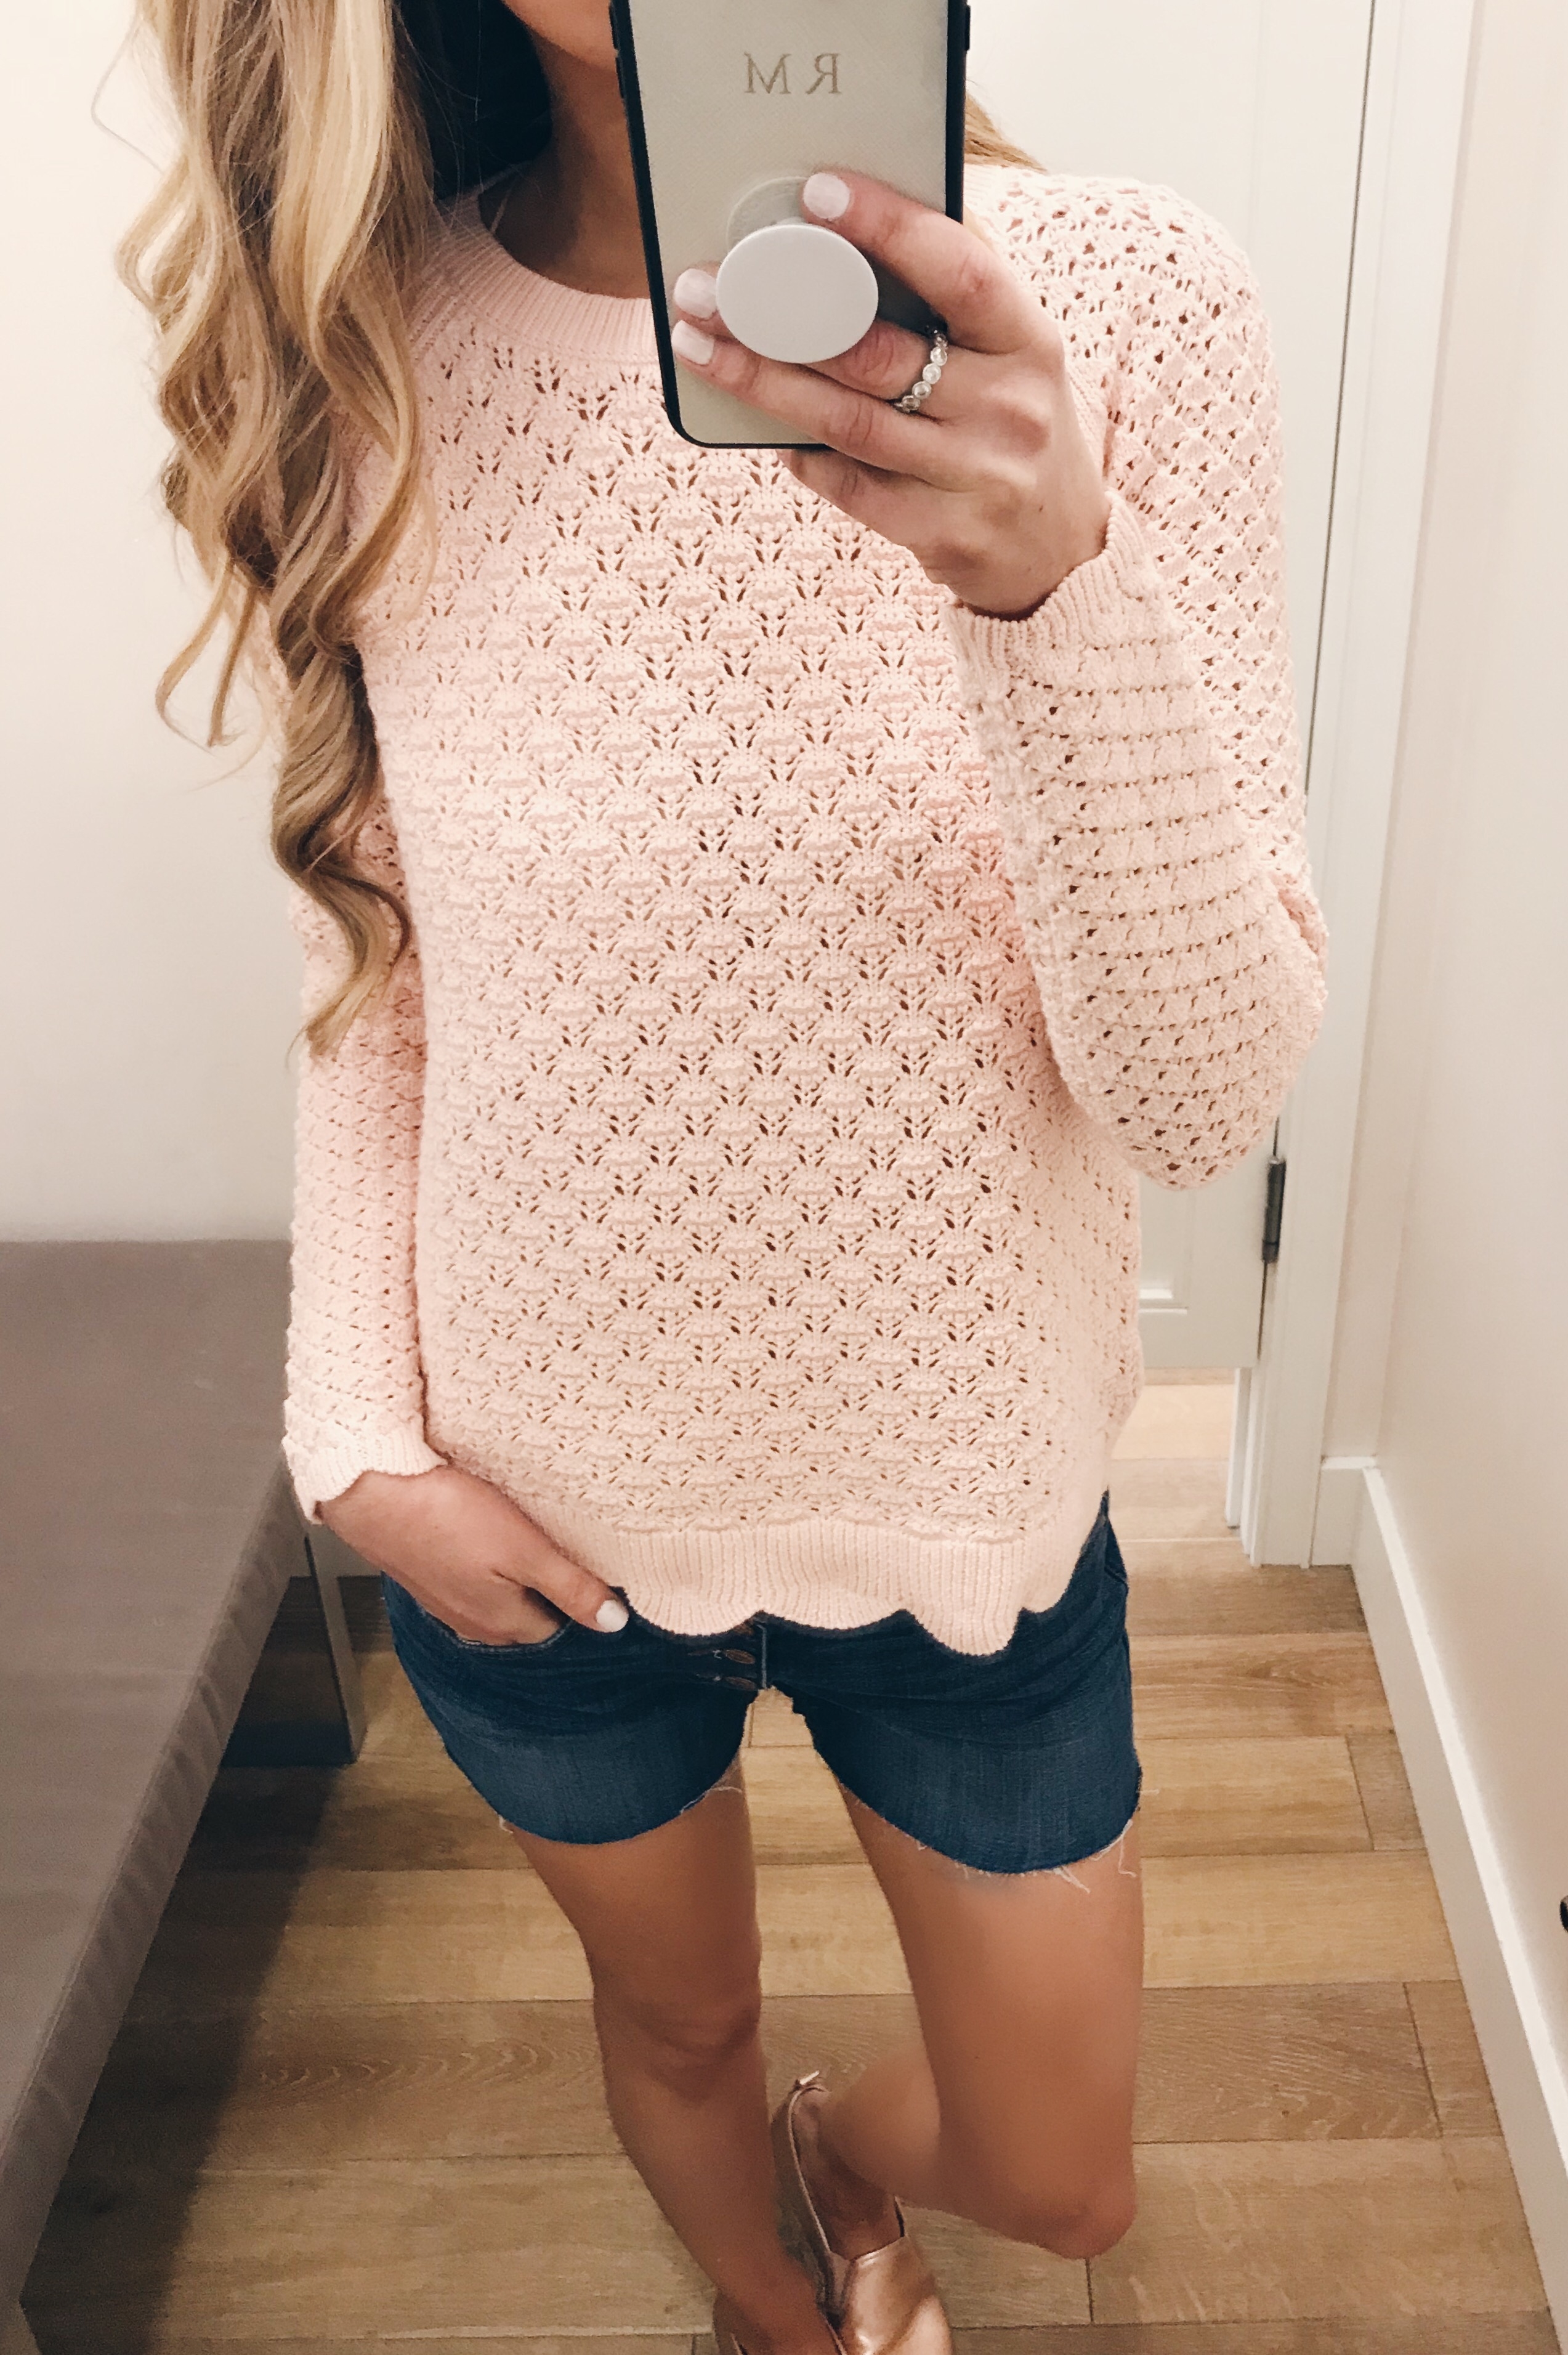 loft spring preview sale - pink scalloped sweater with denim shorts on pinterestingplans on connecticut lifestyle blog pinterestingplans